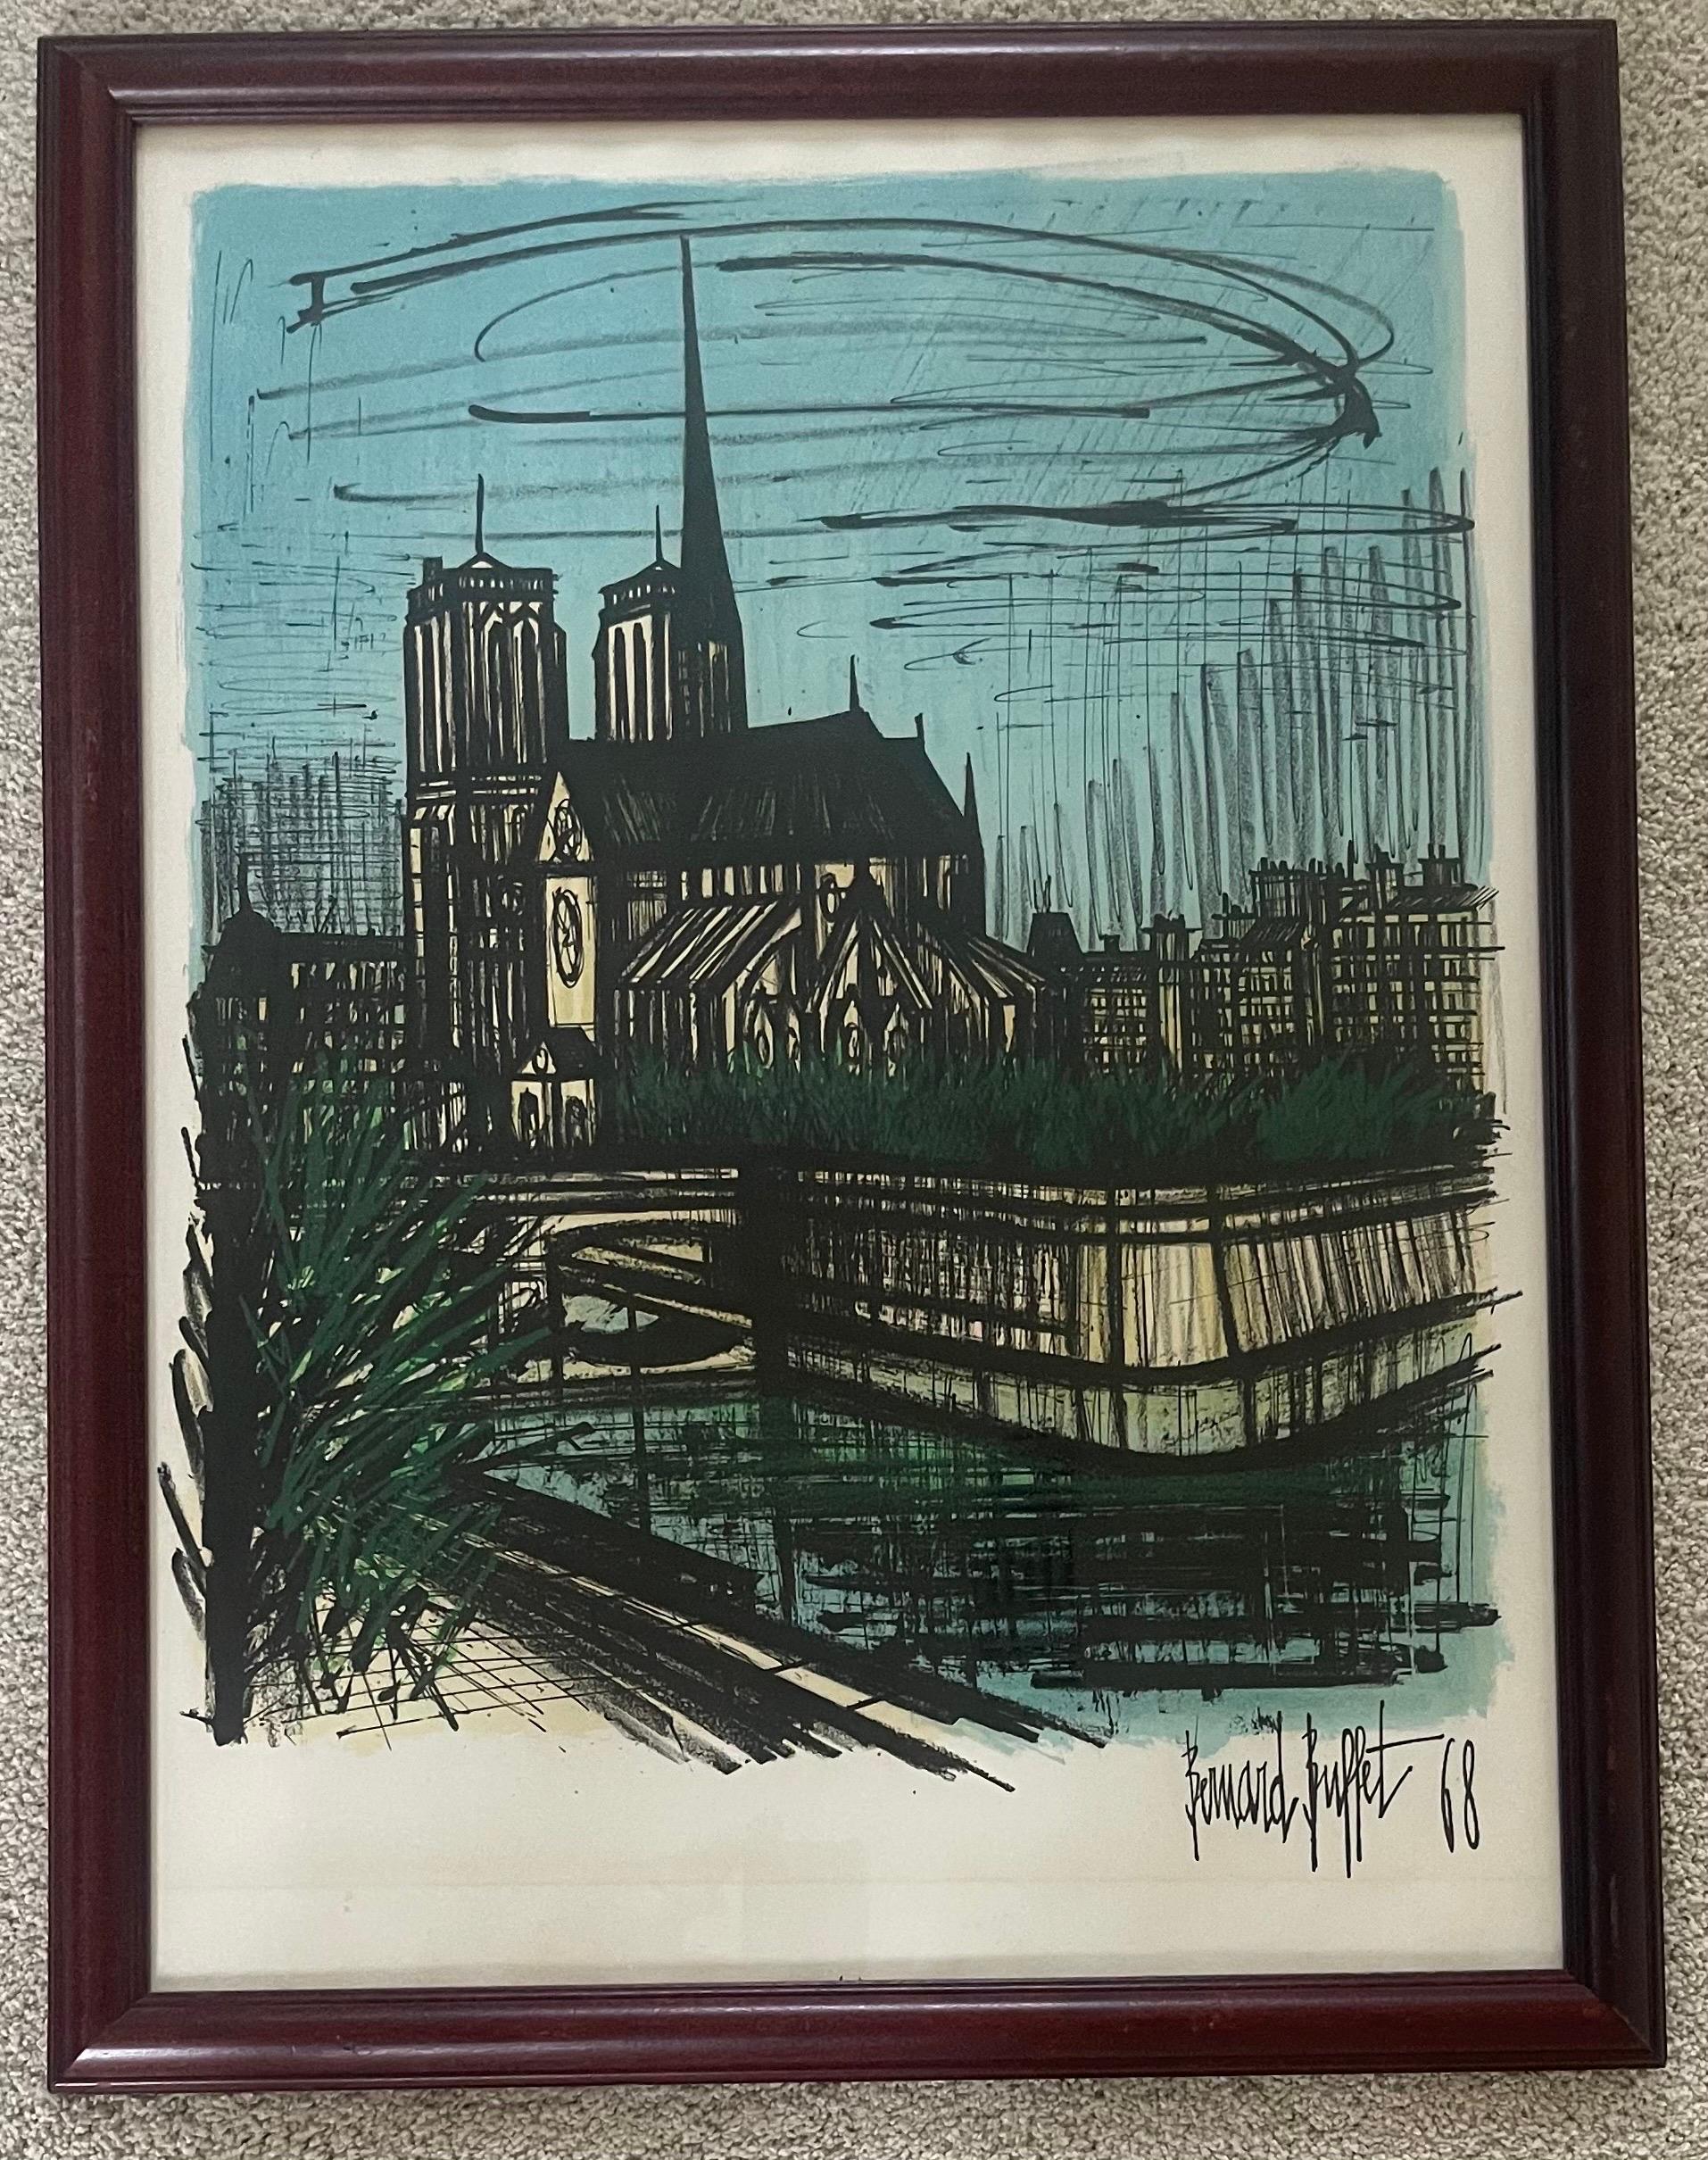 Beautiful framed original MCM lithograph of cathedral Notre Dame in Paris, France by Bernard Buffet, circa 1968. The piece is signed in plate, in good vintage condition and measures 16.75